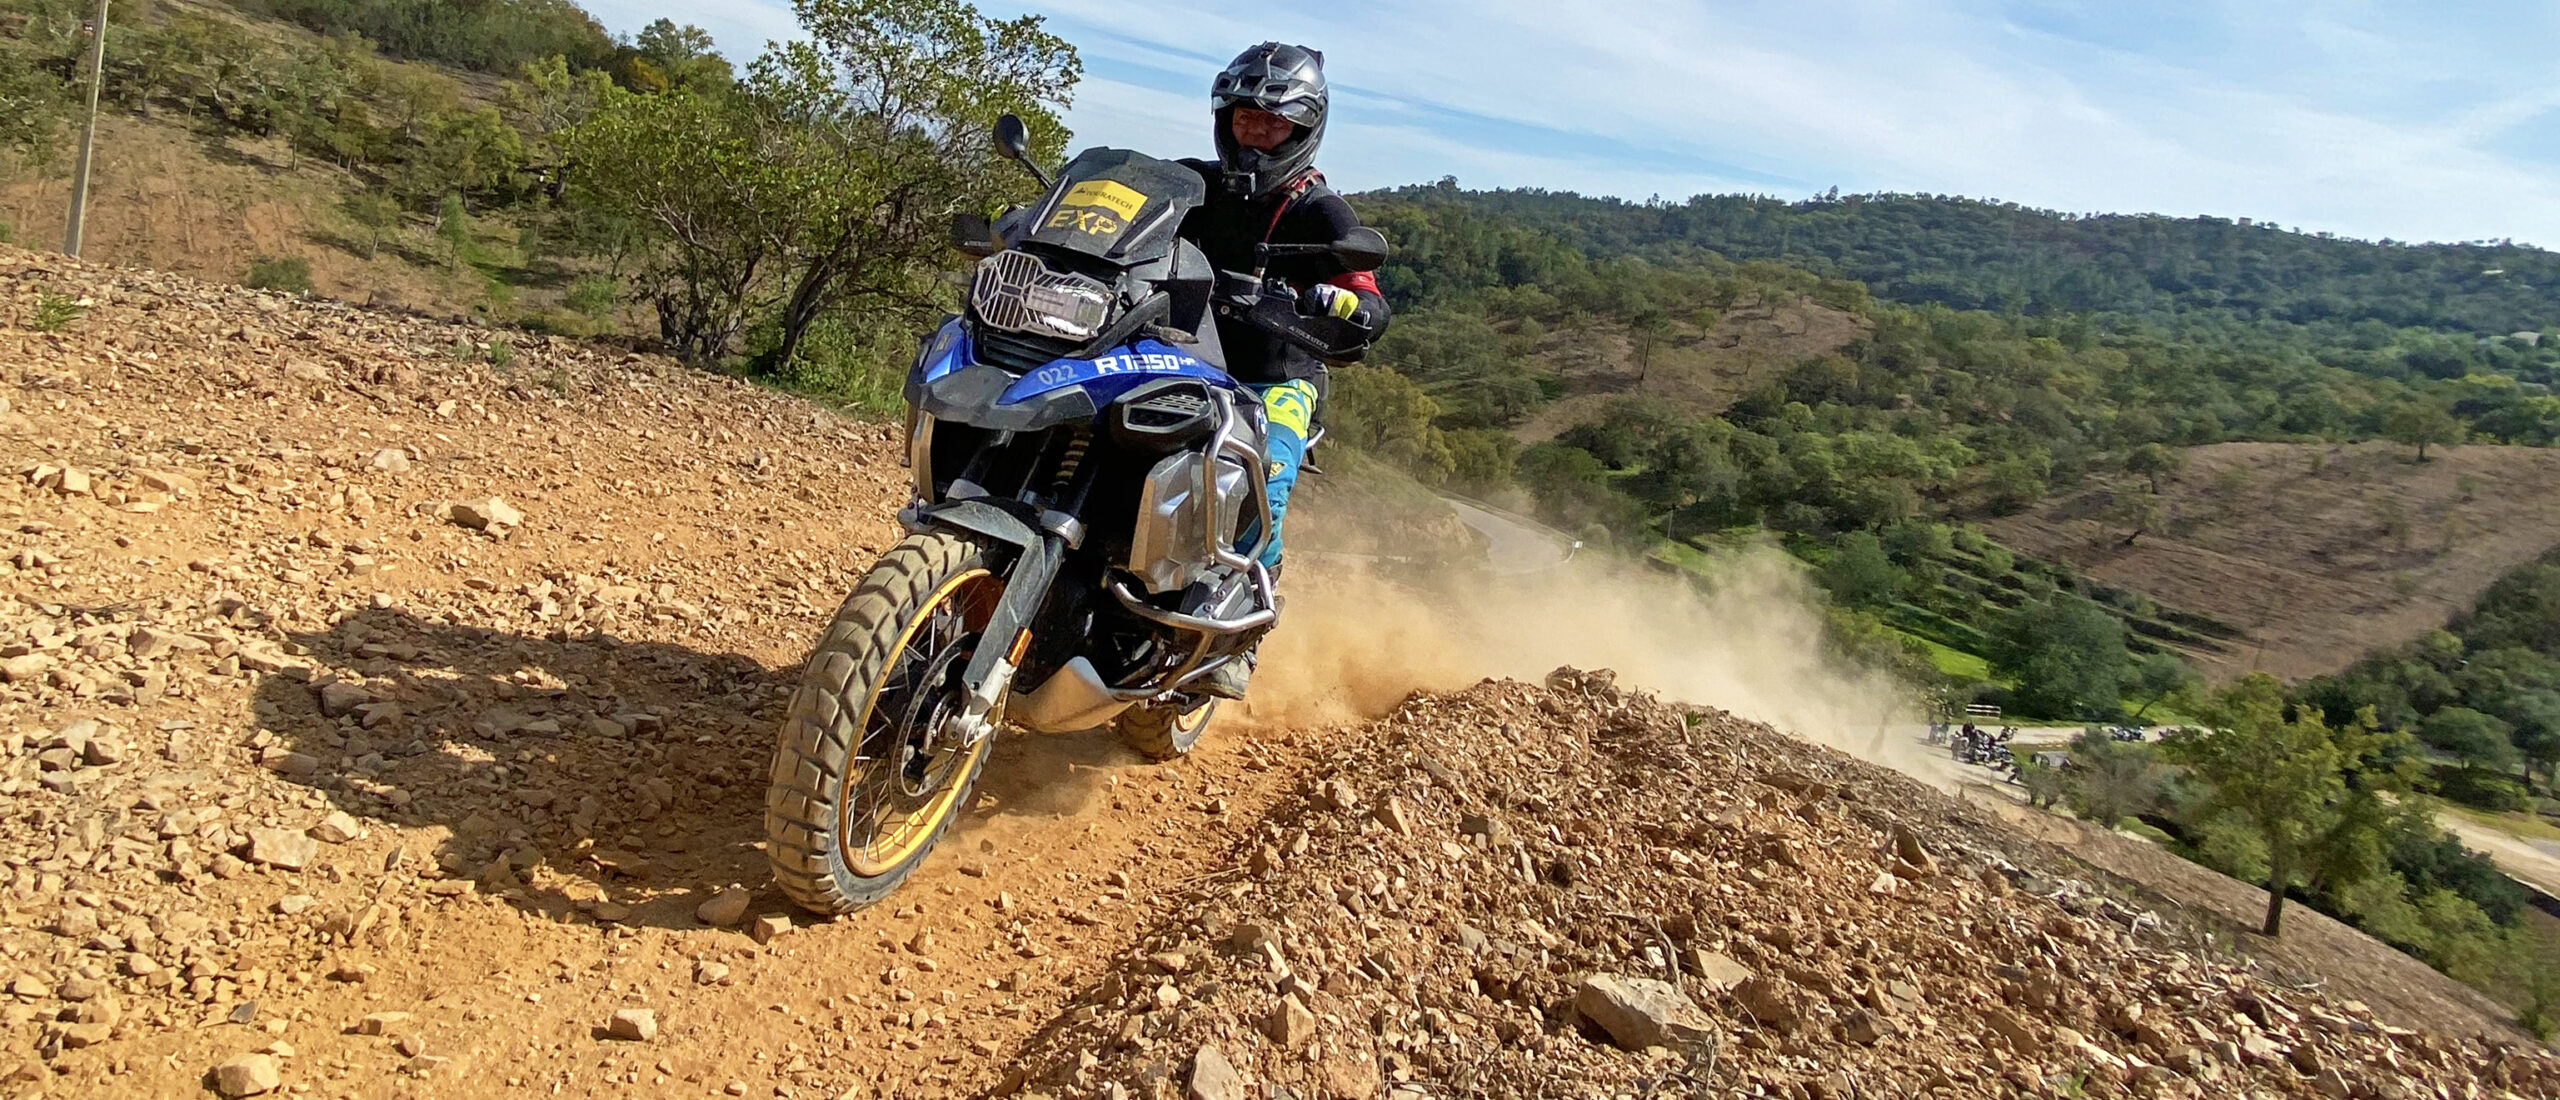 Portugal - Algarve Mountains | Touratech Experience